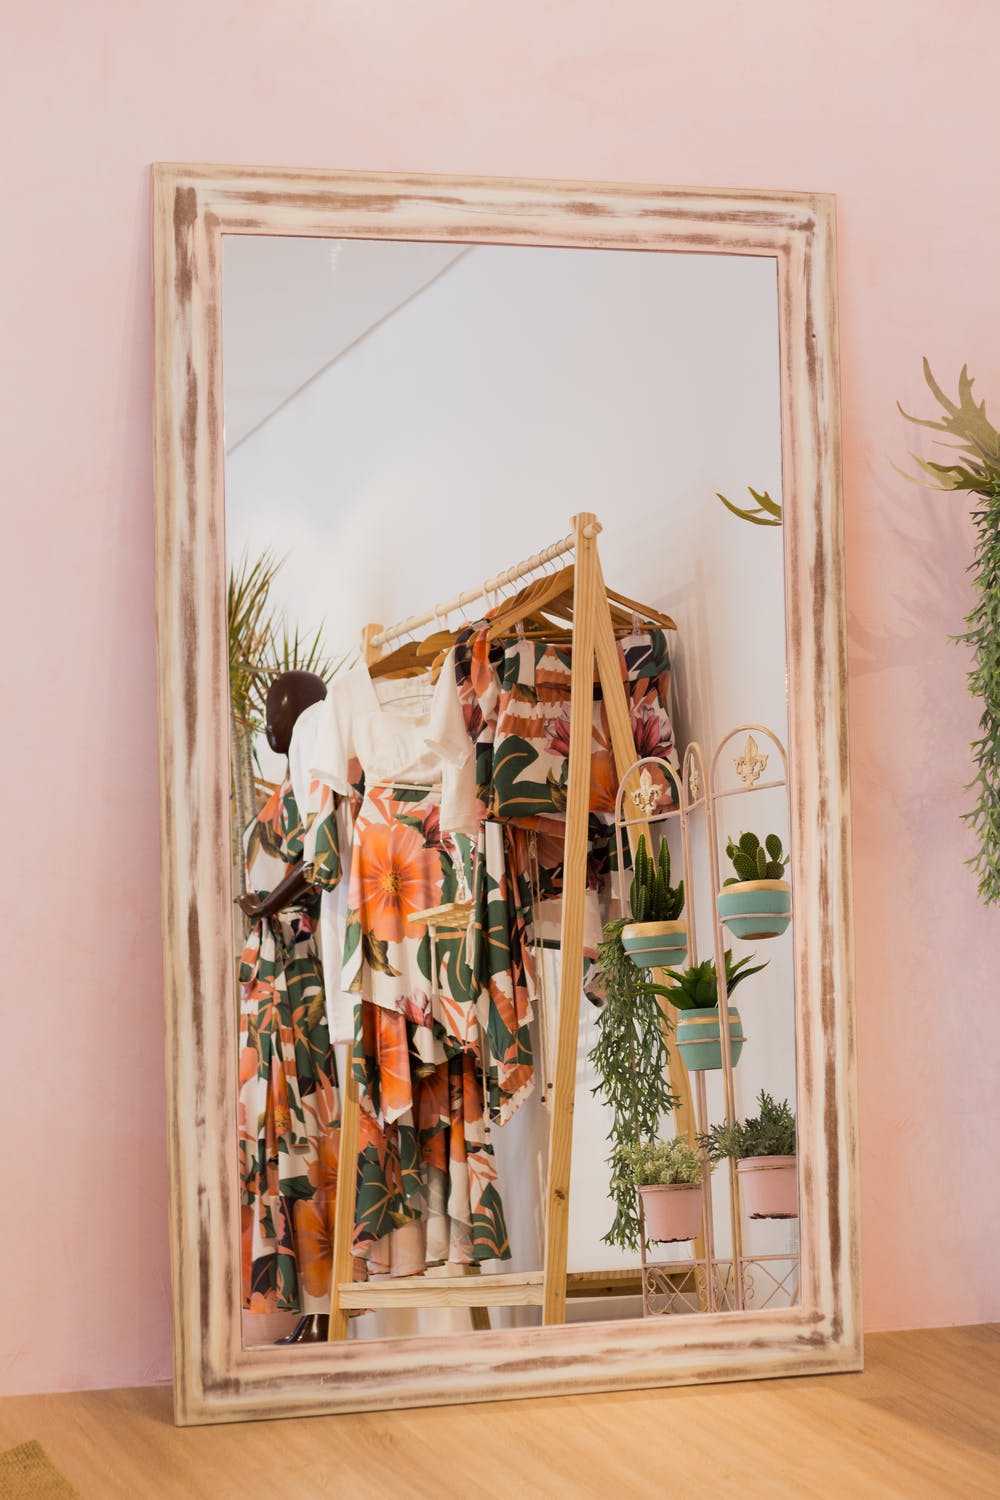 How to Build a Capsule Wardrobe?